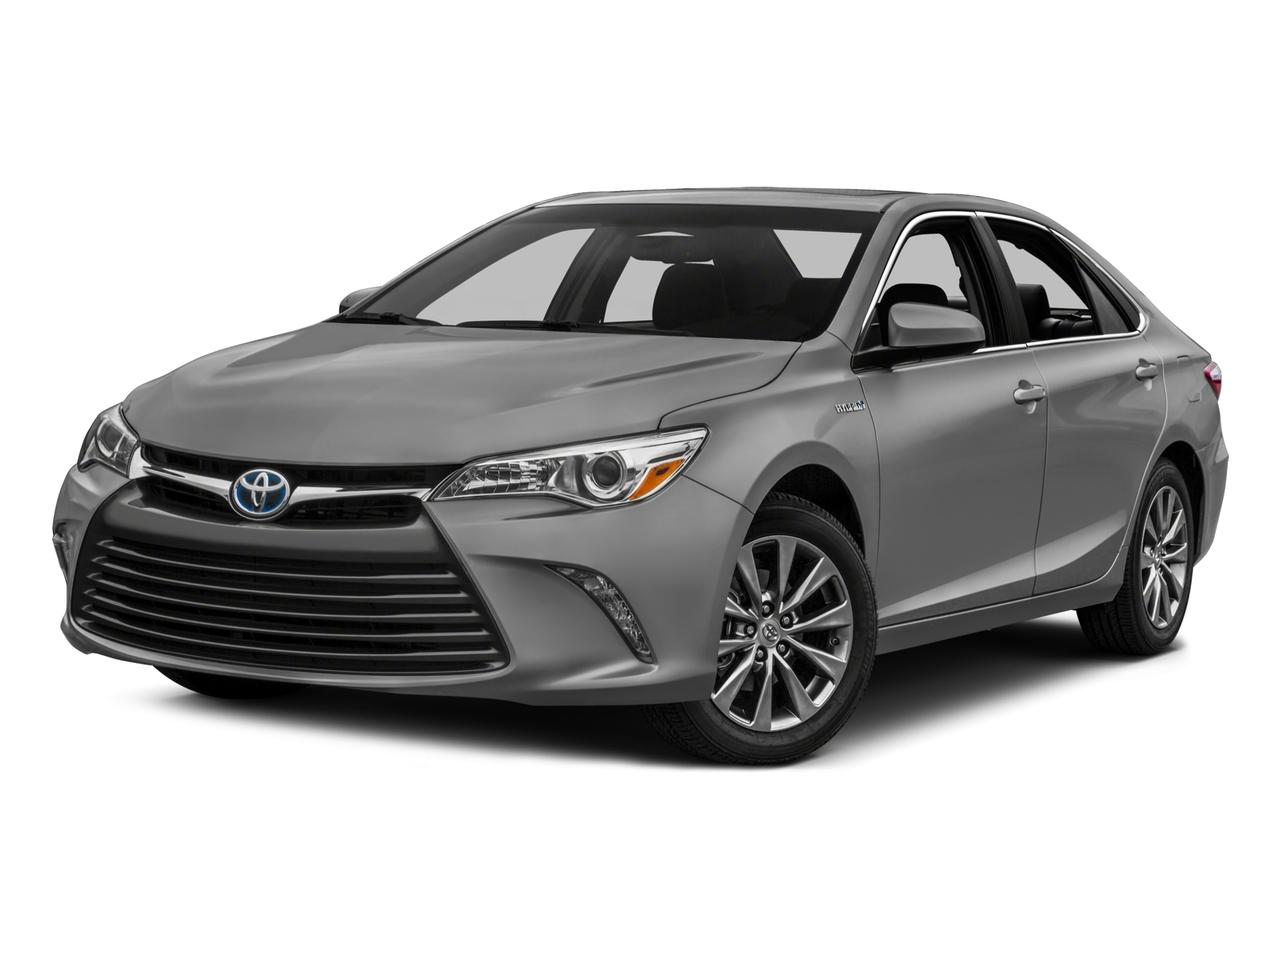 2017 Toyota Camry Vehicle Photo in Denison, TX 75020